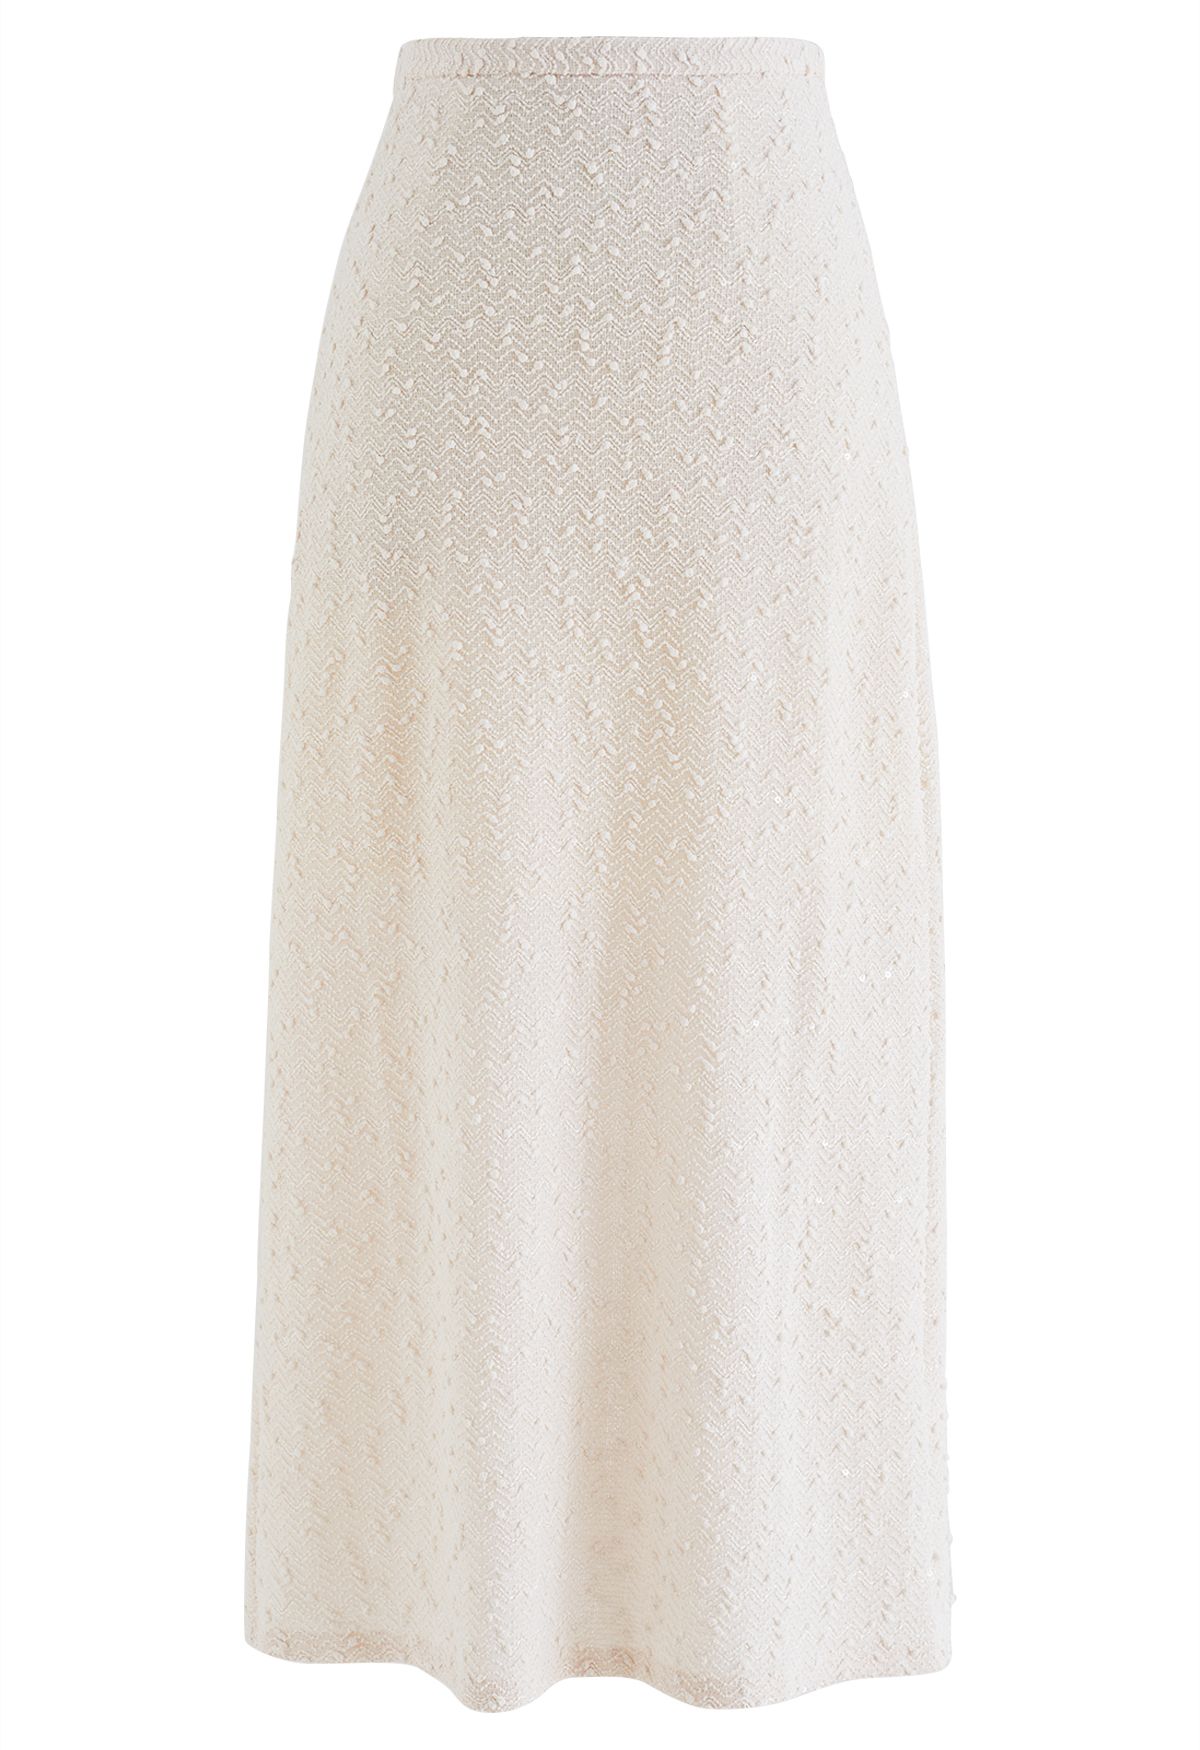 Dotted Wavy Texture Pencil Maxi Skirt in Cream